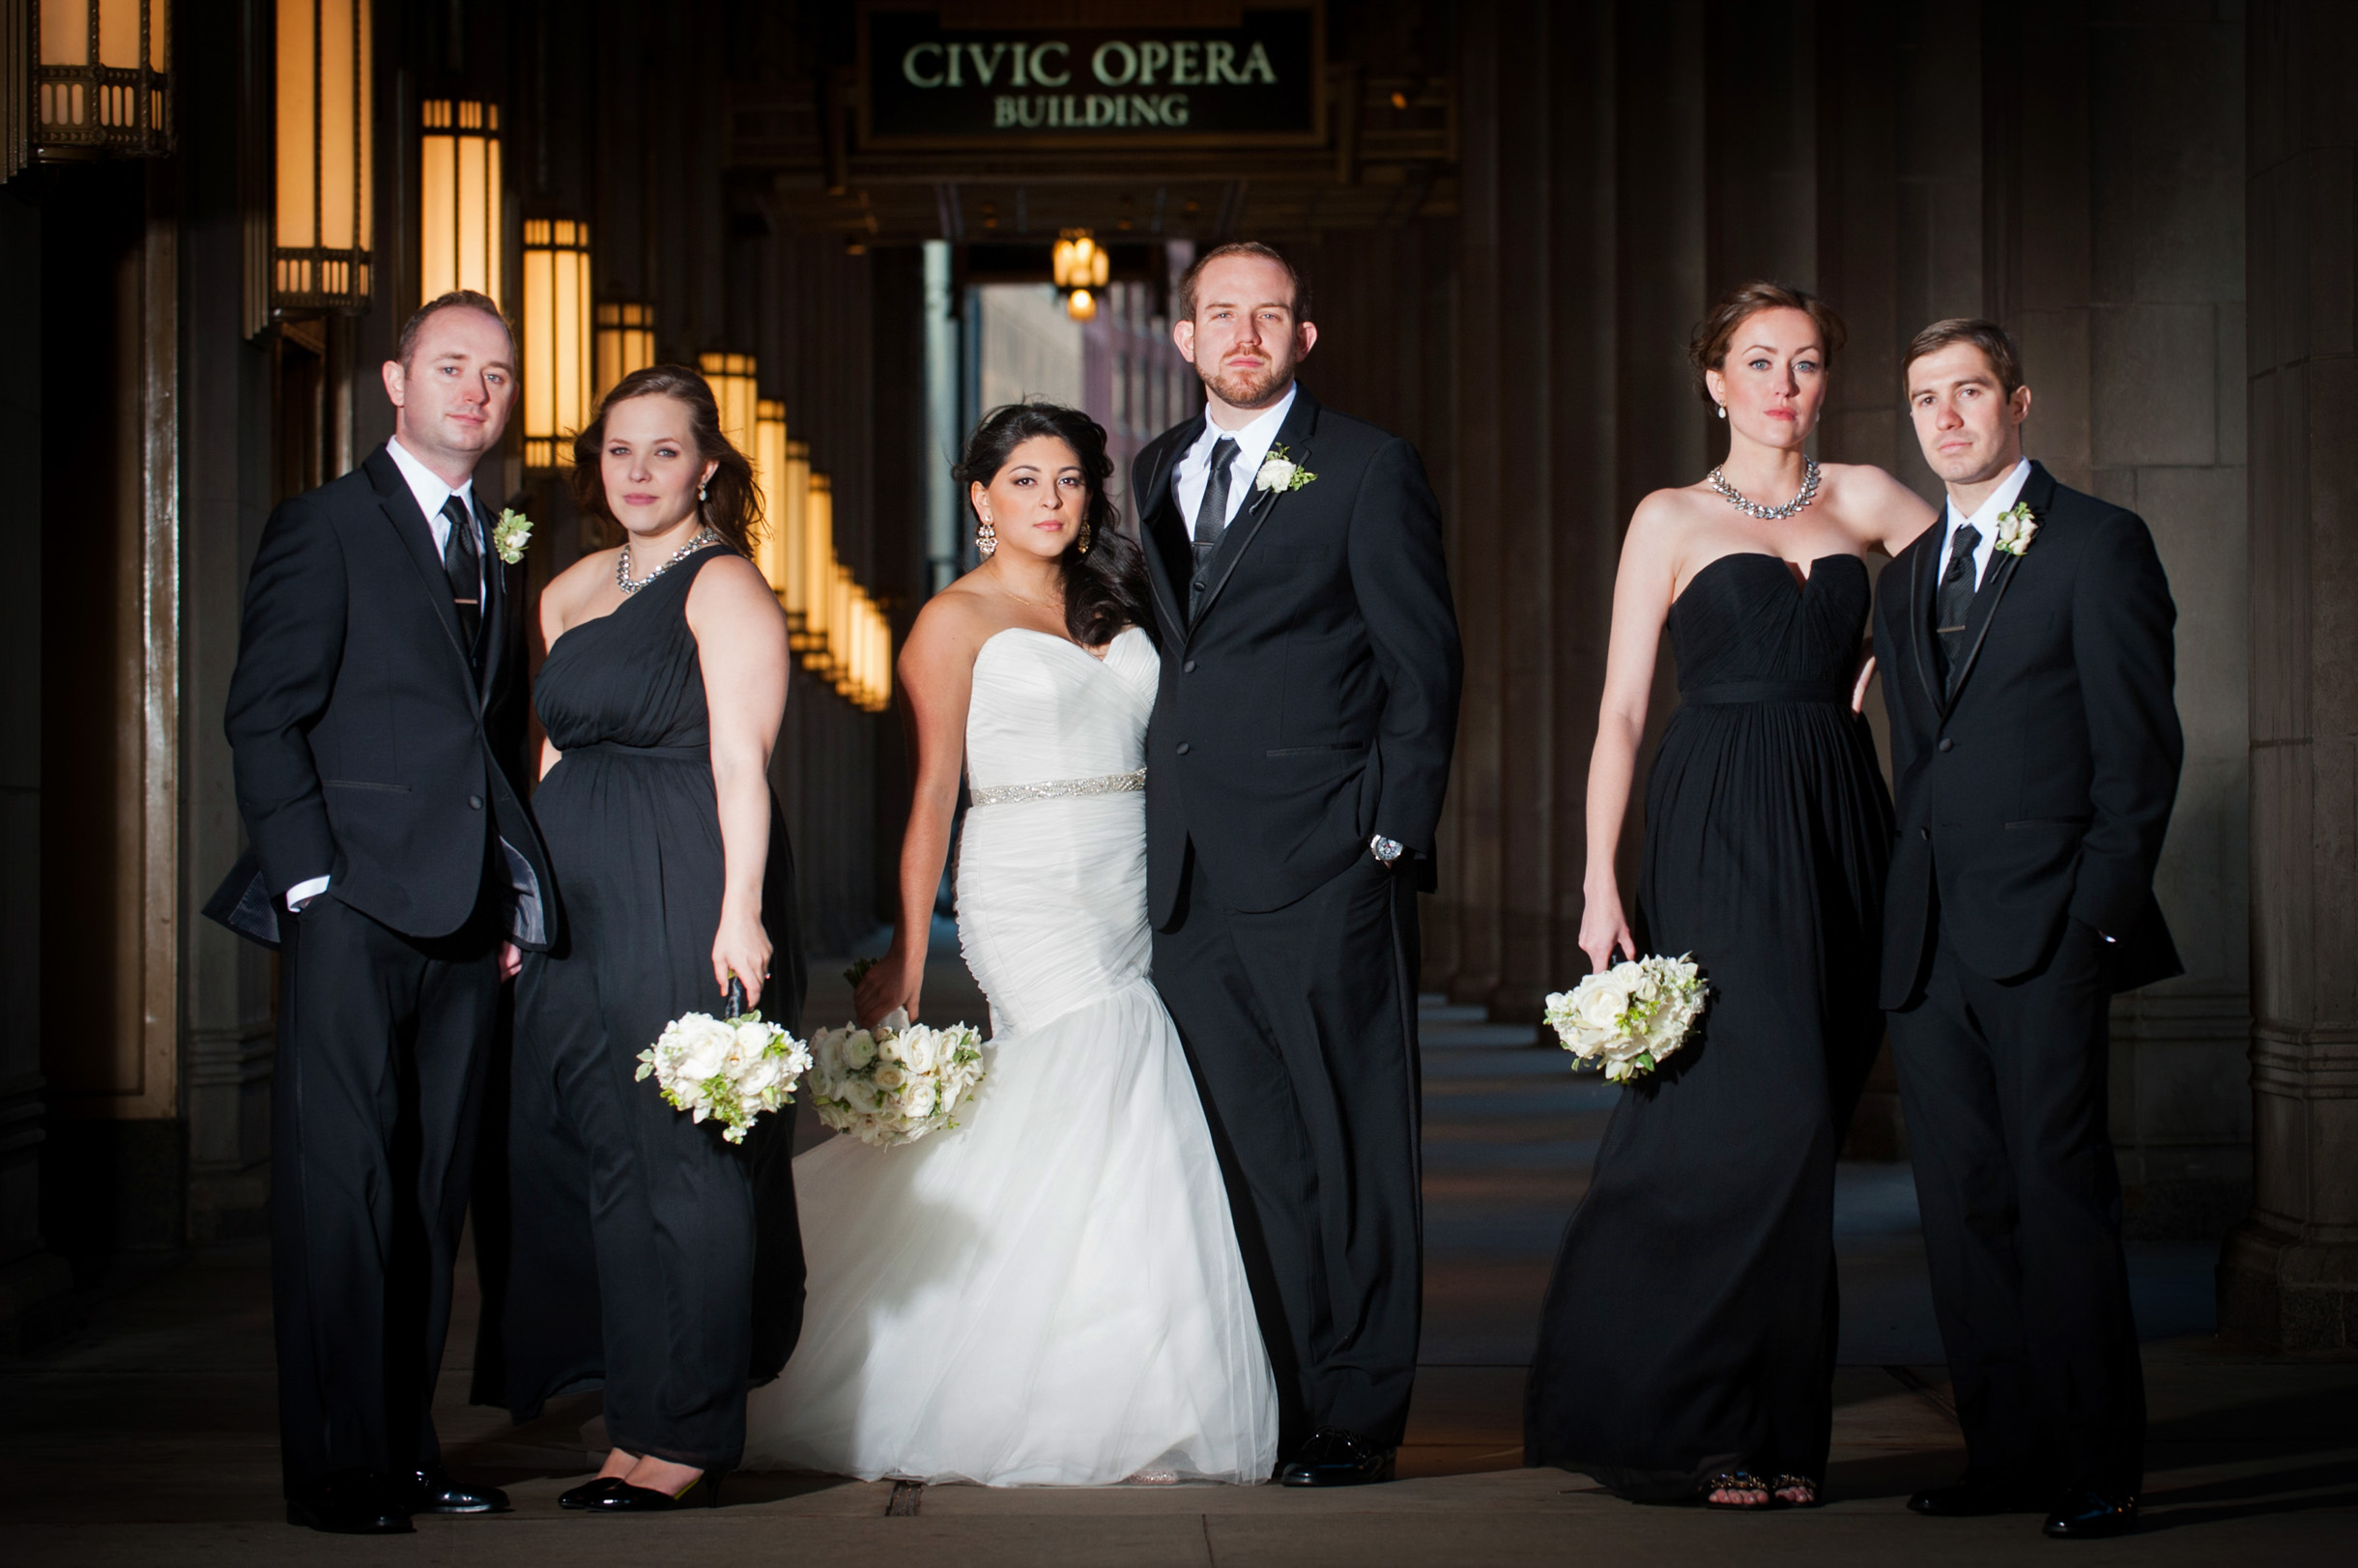 Dramatic wedding party photo at the Lyric Opera in Chicago